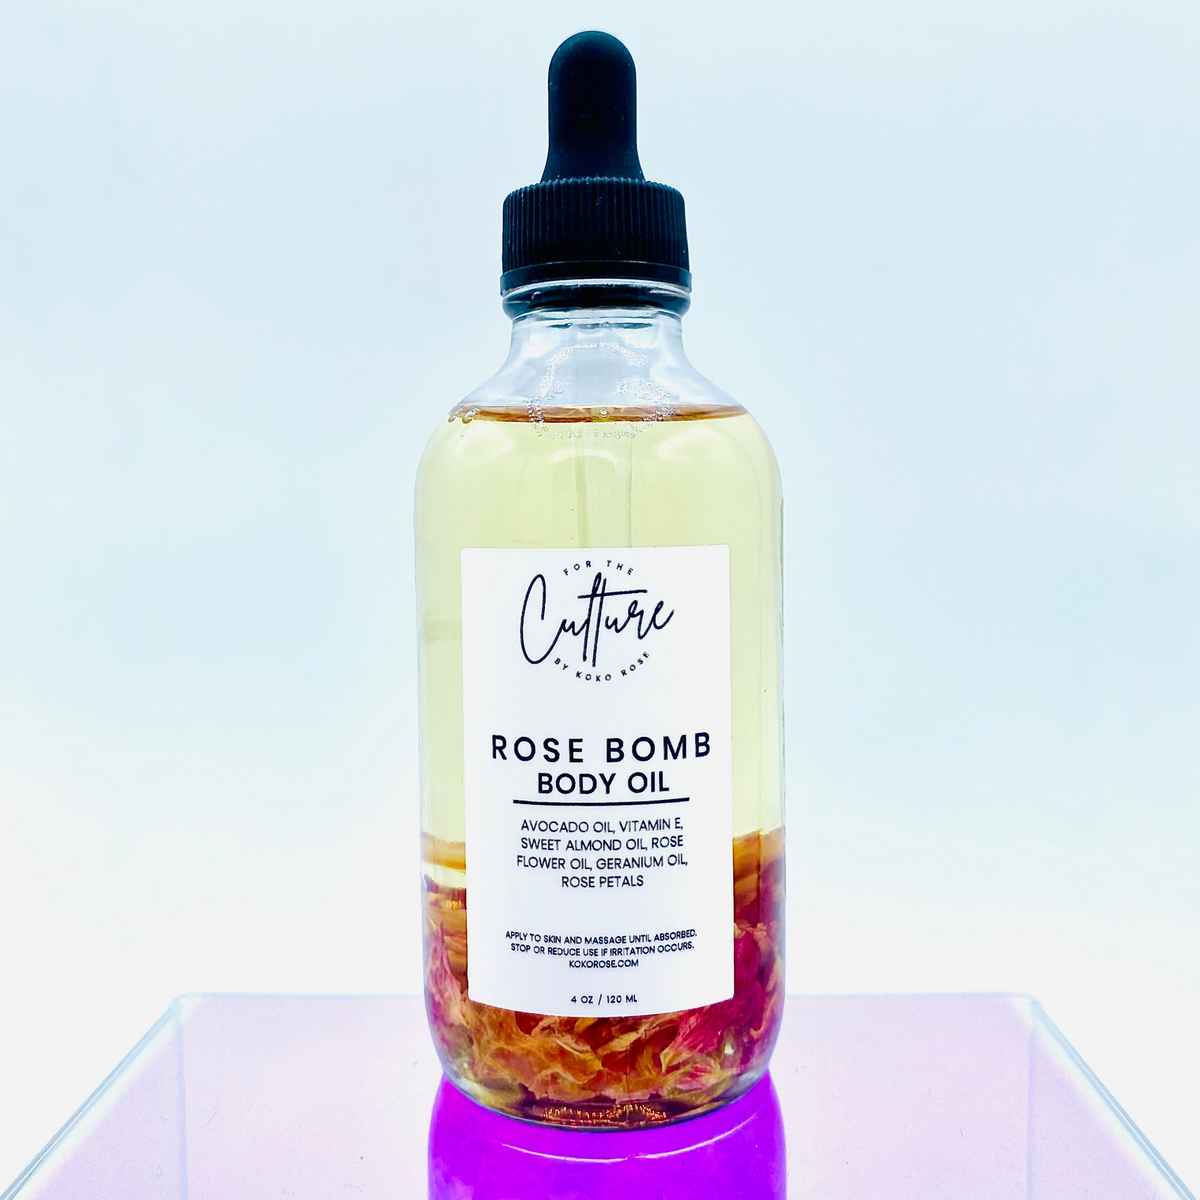 ROSE BOMB INFUSED BODY OIL